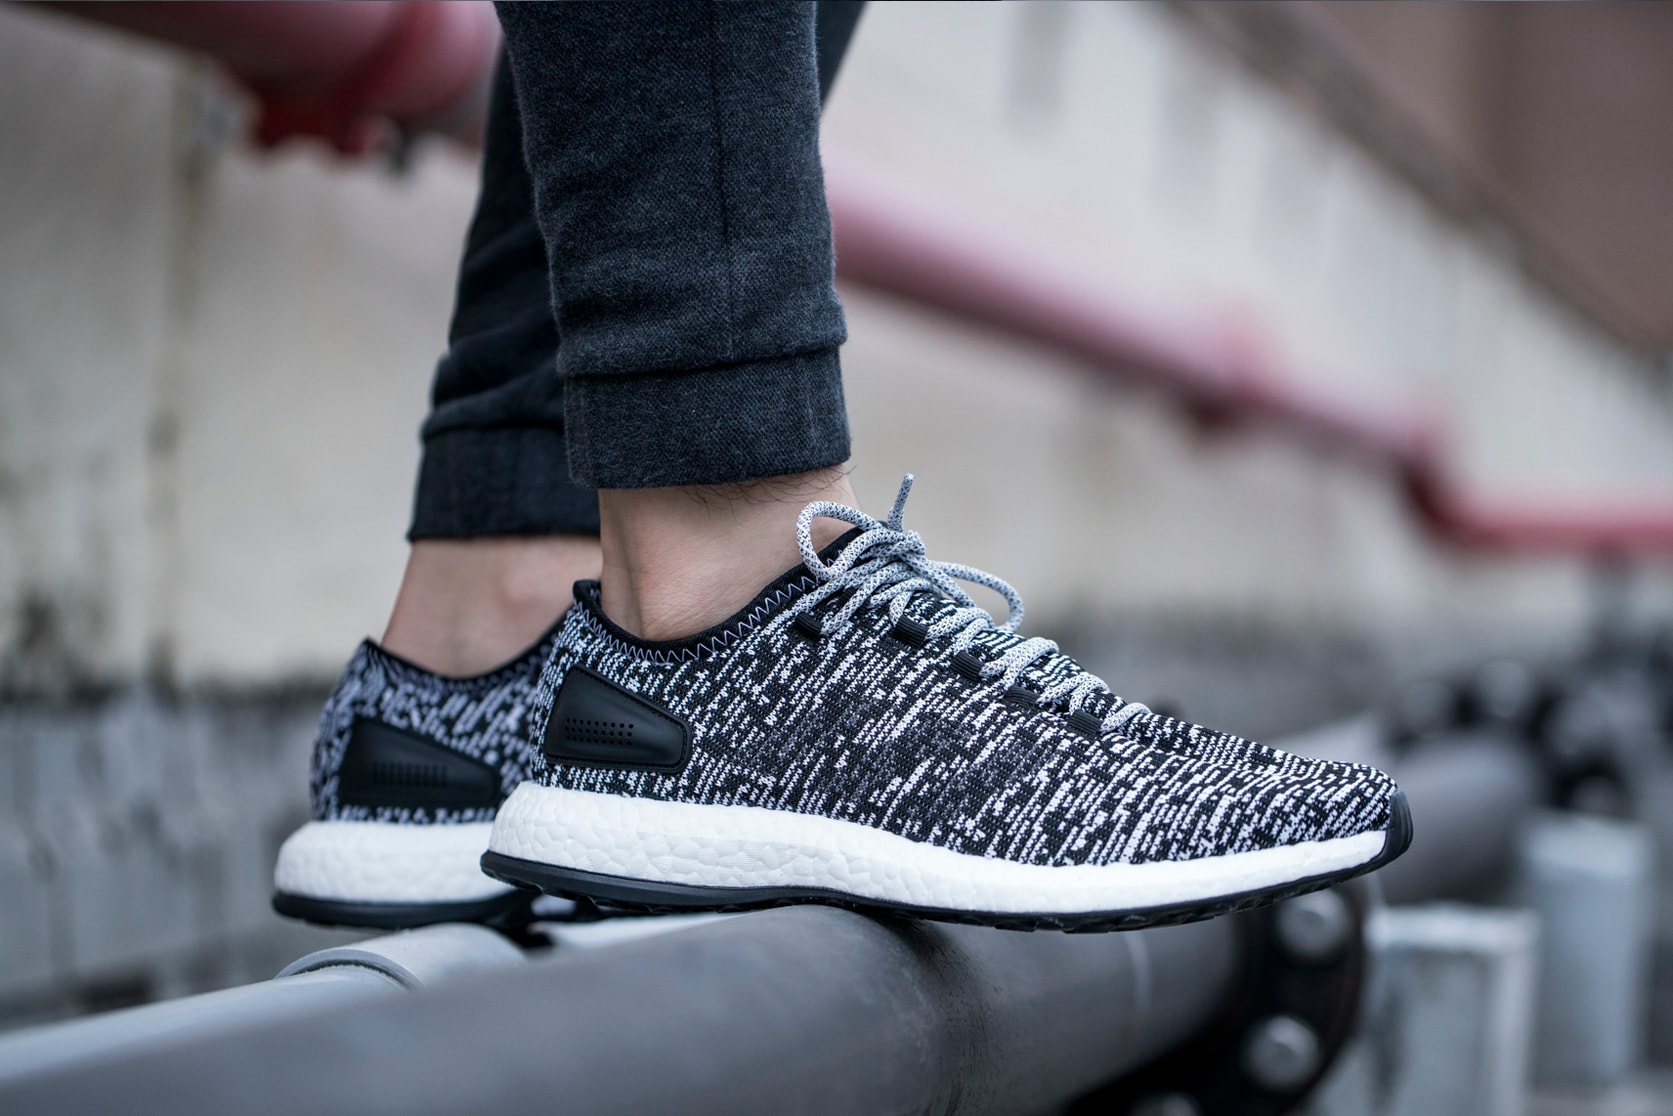 What Makes the New PureBOOST Different From Other BOOST Models